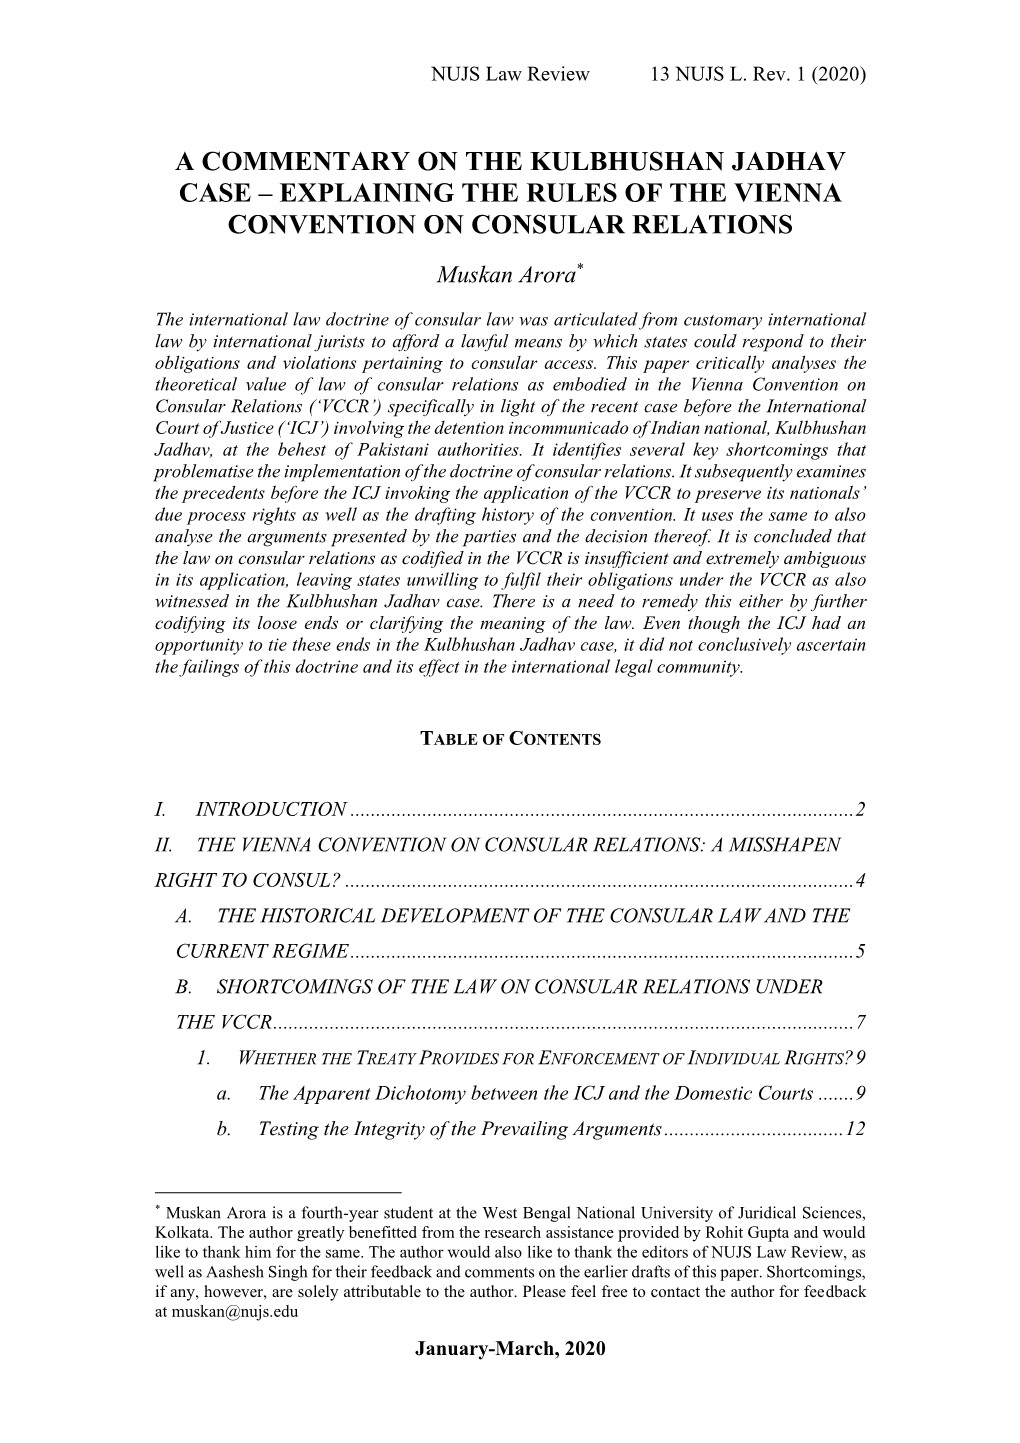 A Commentary on the Kulbhushan Jadhav Case – Explaining the Rules of the Vienna Convention on Consular Relations